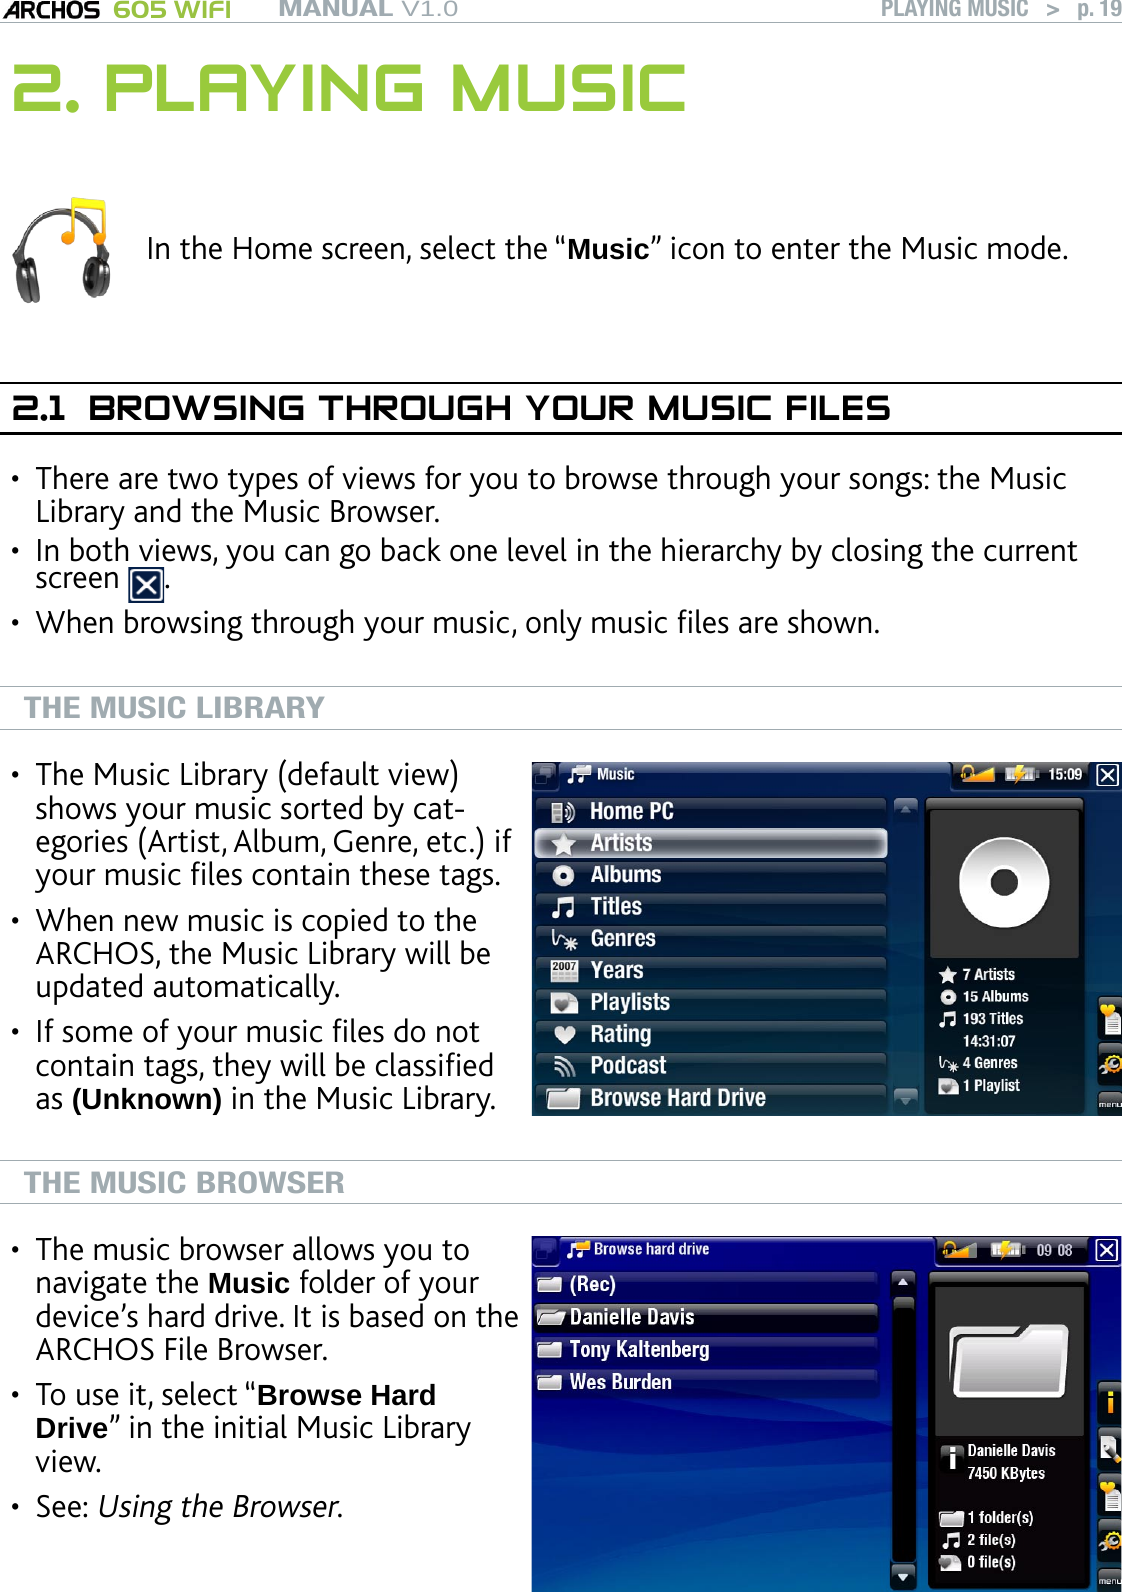 MANUAL V1.0 605 WIFI PLAYING MUSIC   &gt;   p. 192. PLAYING MUSICIn the Home screen, select the “Music” icon to enter the Music mode.2.1  BROWSING THROUGH YOUR MUSIC FILESThere are two types of views for you to browse through your songs: the Music Library and the Music Browser.In both views, you can go back one level in the hierarchy by closing the current screen  .When browsing through your music, only music les are shown.THE MUSIC LIBRARYThe Music Library (default view) shows your music sorted by cat-egories (Artist, Album, Genre, etc.) if your music les contain these tags.When new music is copied to the ARCHOS, the Music Library will be updated automatically.If some of your music les do not contain tags, they will be classied as (Unknown) in the Music Library.•••THE MUSIC BROWSERThe music browser allows you to navigate the Music folder of your device’s hard drive. It is based on the ARCHOS File Browser.To use it, select “Browse Hard Drive” in the initial Music Library view.See: Using the Browser.••••••